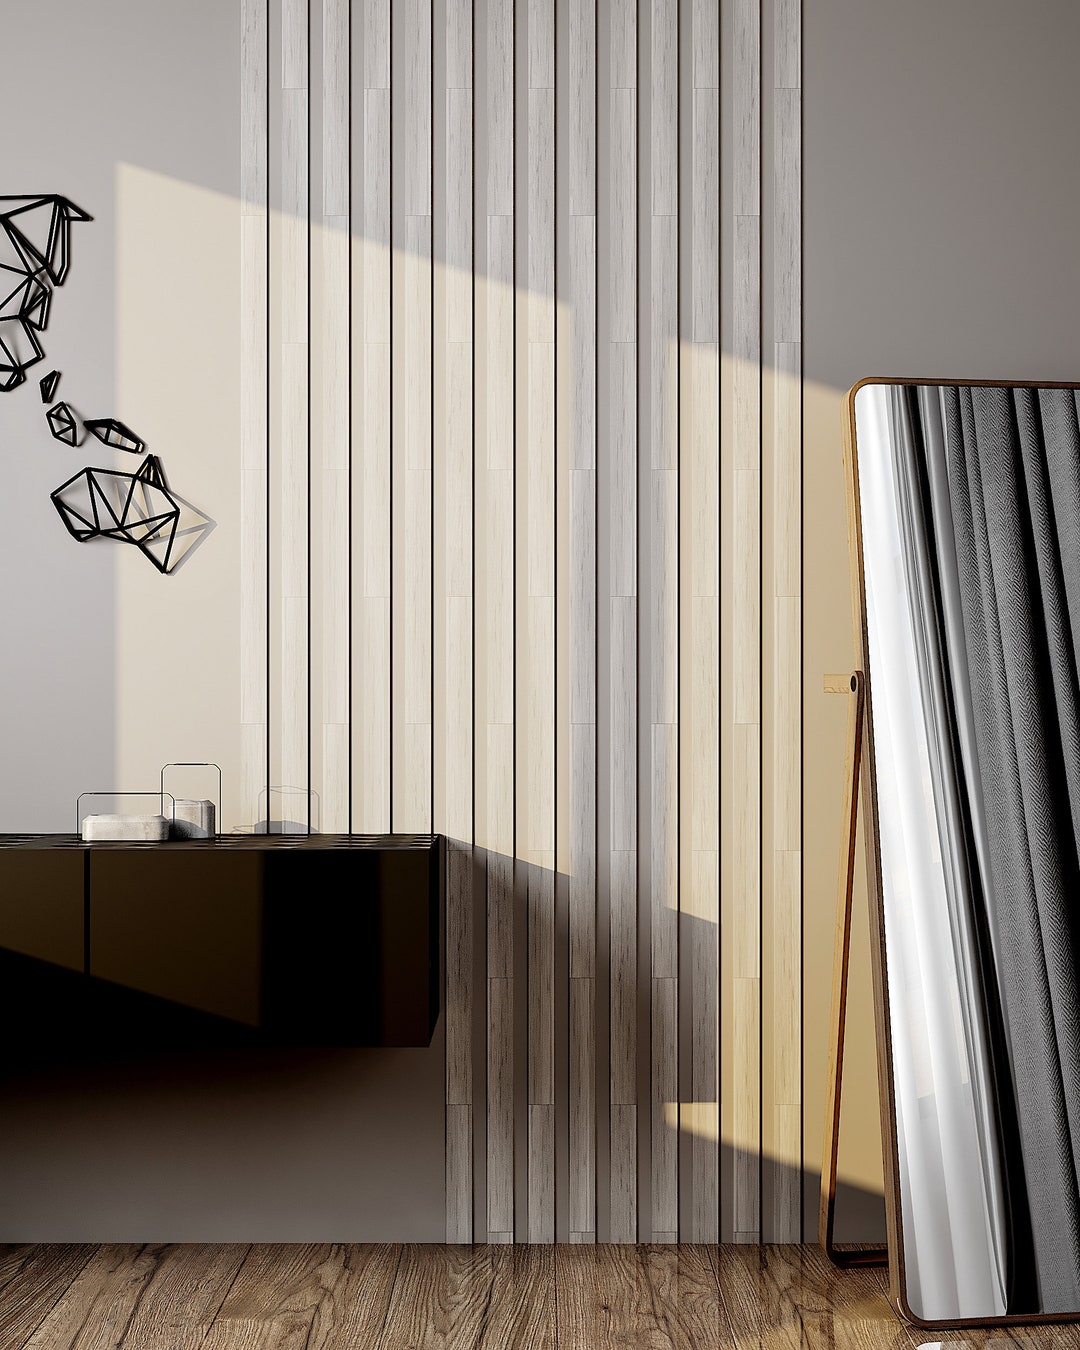 Woven Image launches acoustic panels informed by art deco